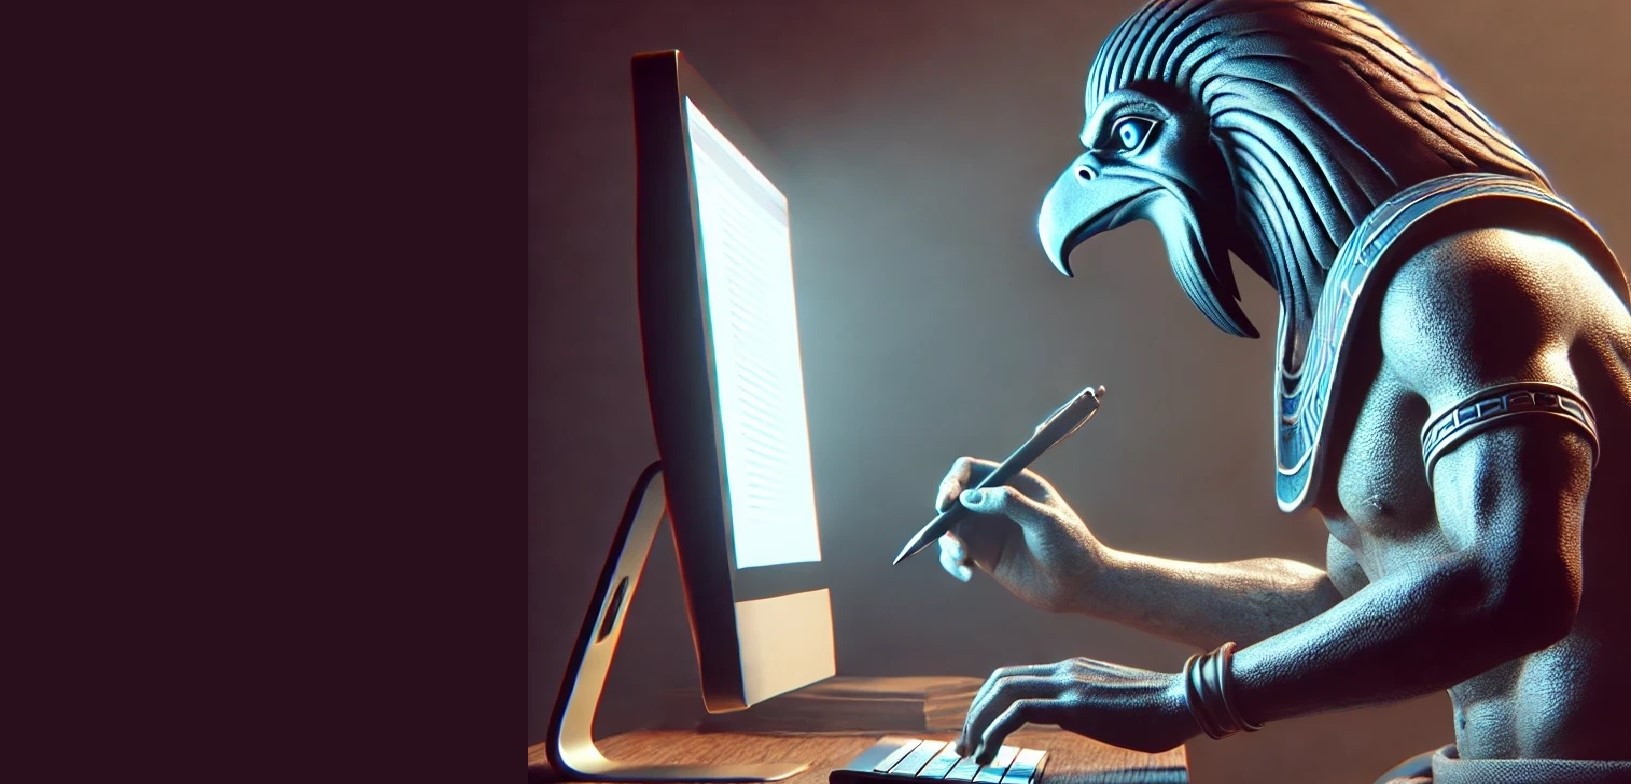 shamanic figure with the head of a bird, reminiscent of an Egyptian god, seated at a wooden desk and engaging in automatic writing on a modern computer. The figure holds a stylus in one hand and types on a keyboard with the other, illuminated by the screen's light.